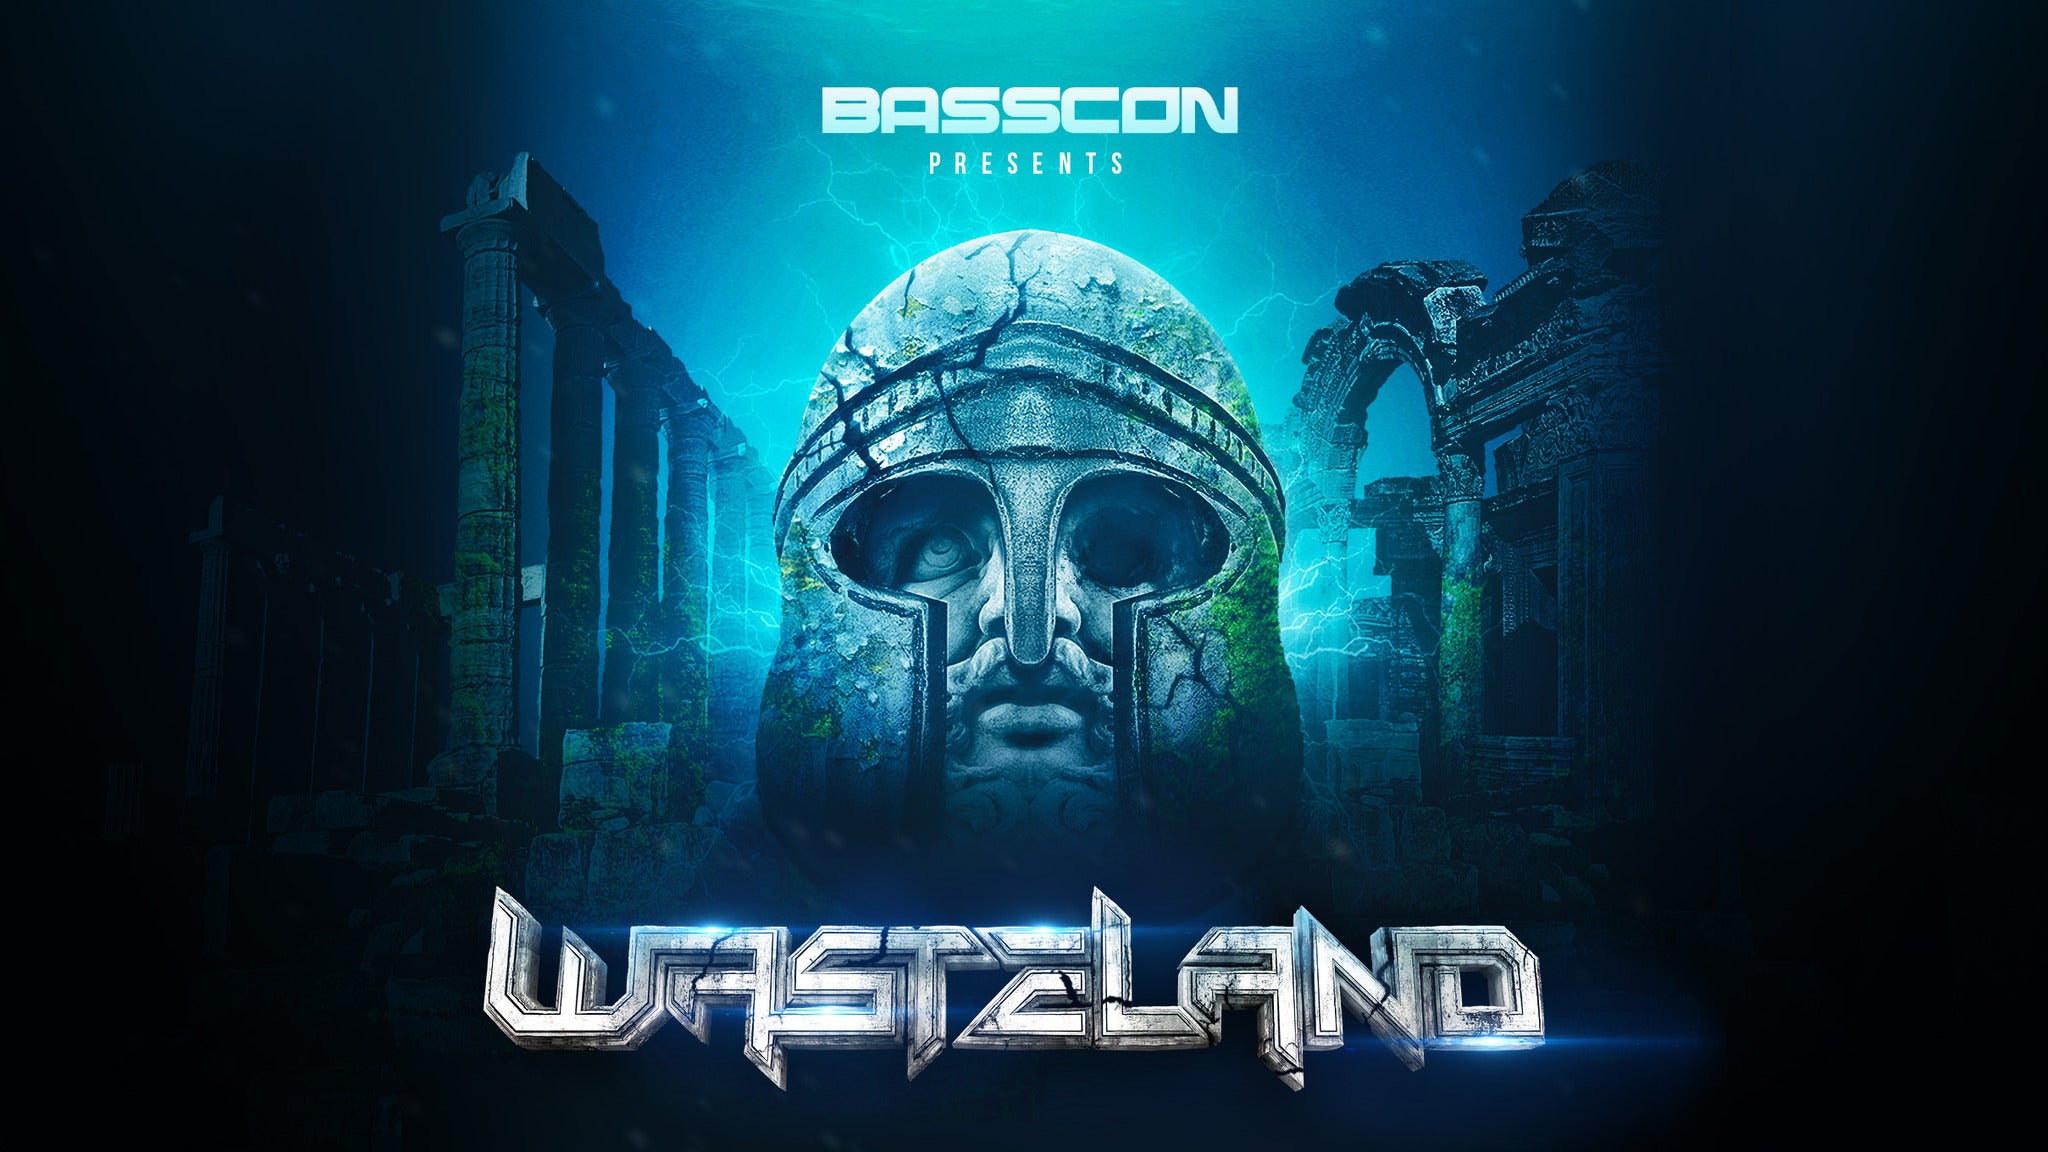 Basscon - Wasteland in Hollywood promo photo for Basscon presale offer code